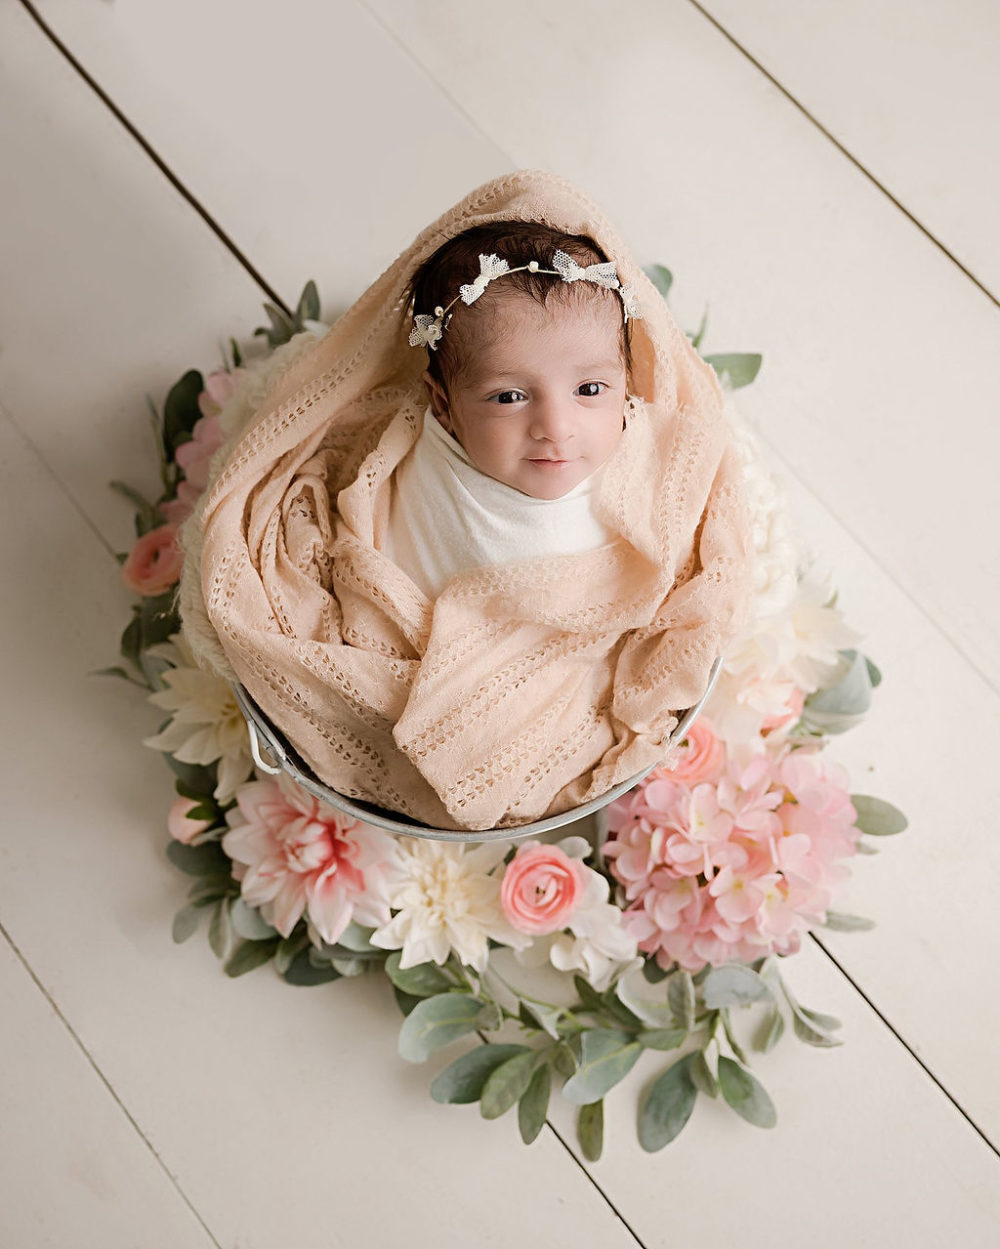 Newborn girl awake and smiling in bucker prop for her first in-studio newborn session in Vineland, New Jersey.